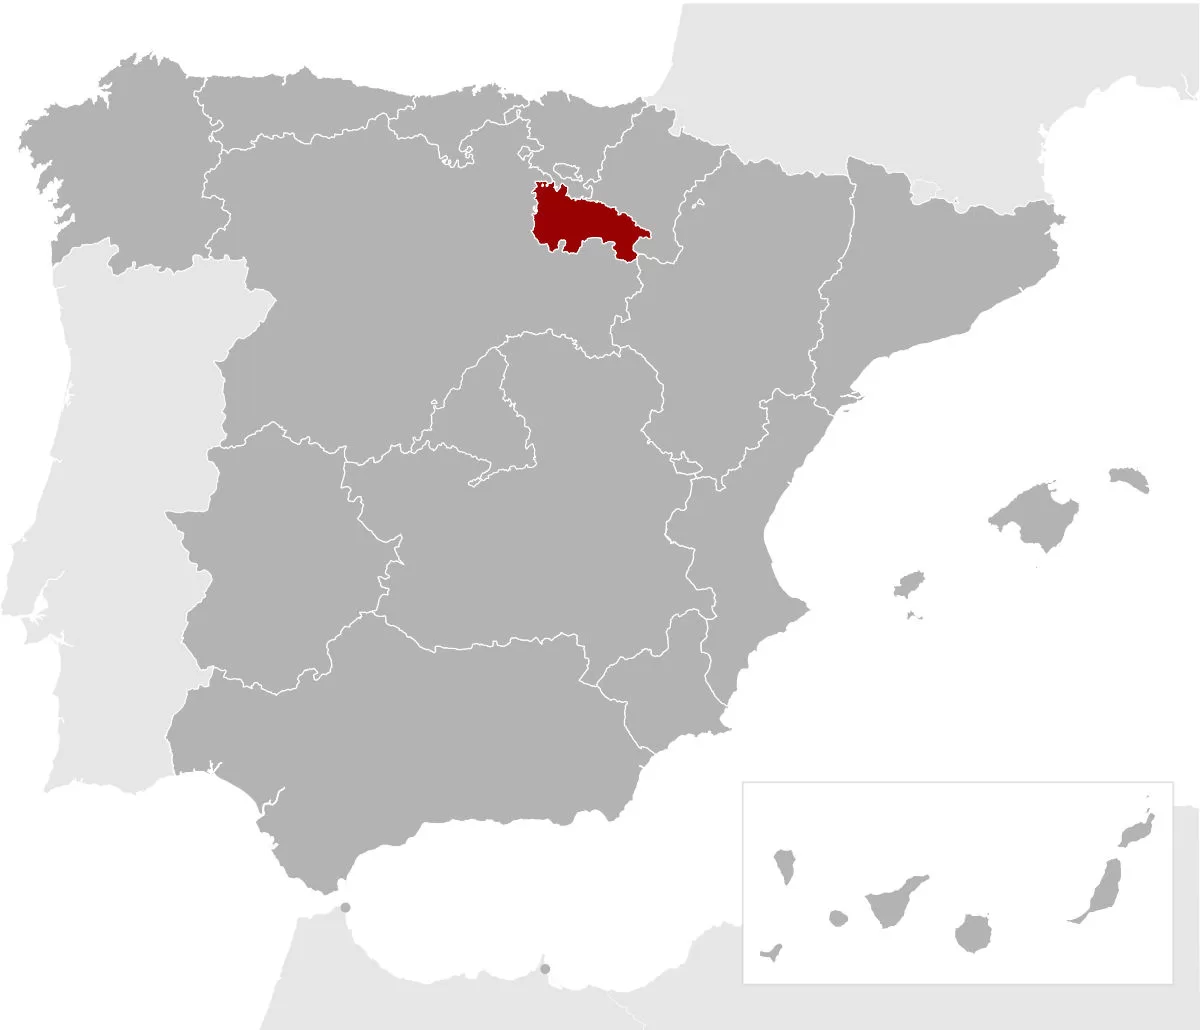 regional map of Spain with the La Rioja region highlighted in red